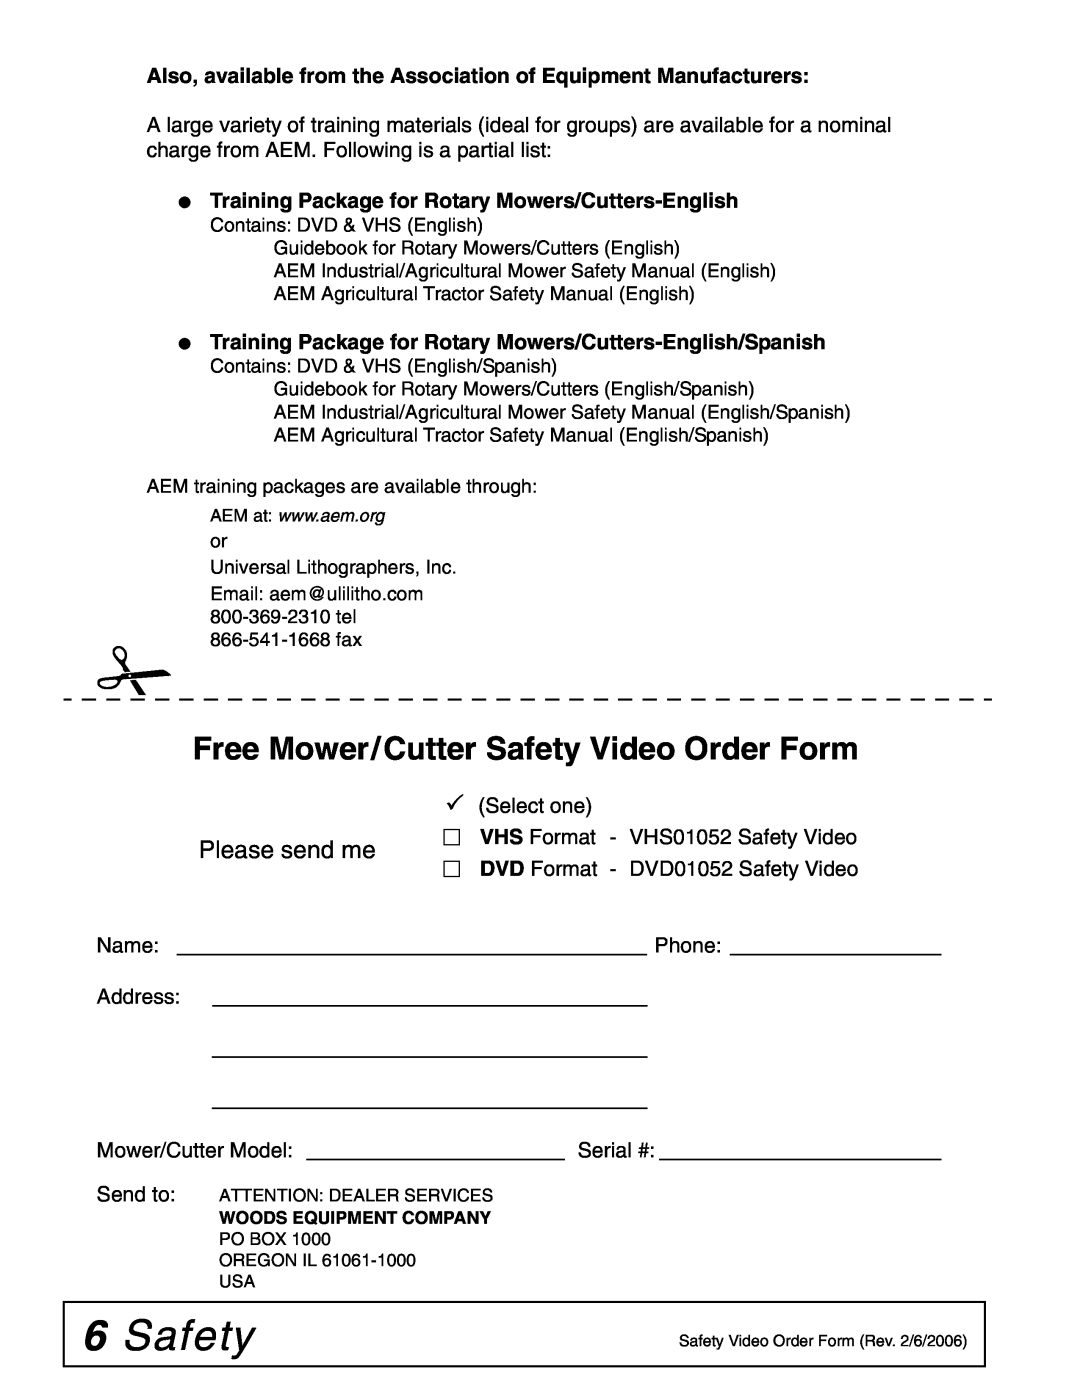 Woods Equipment RCC42 manual 6Safety, Free Mower/Cutter Safety Video Order Form, Please send me 